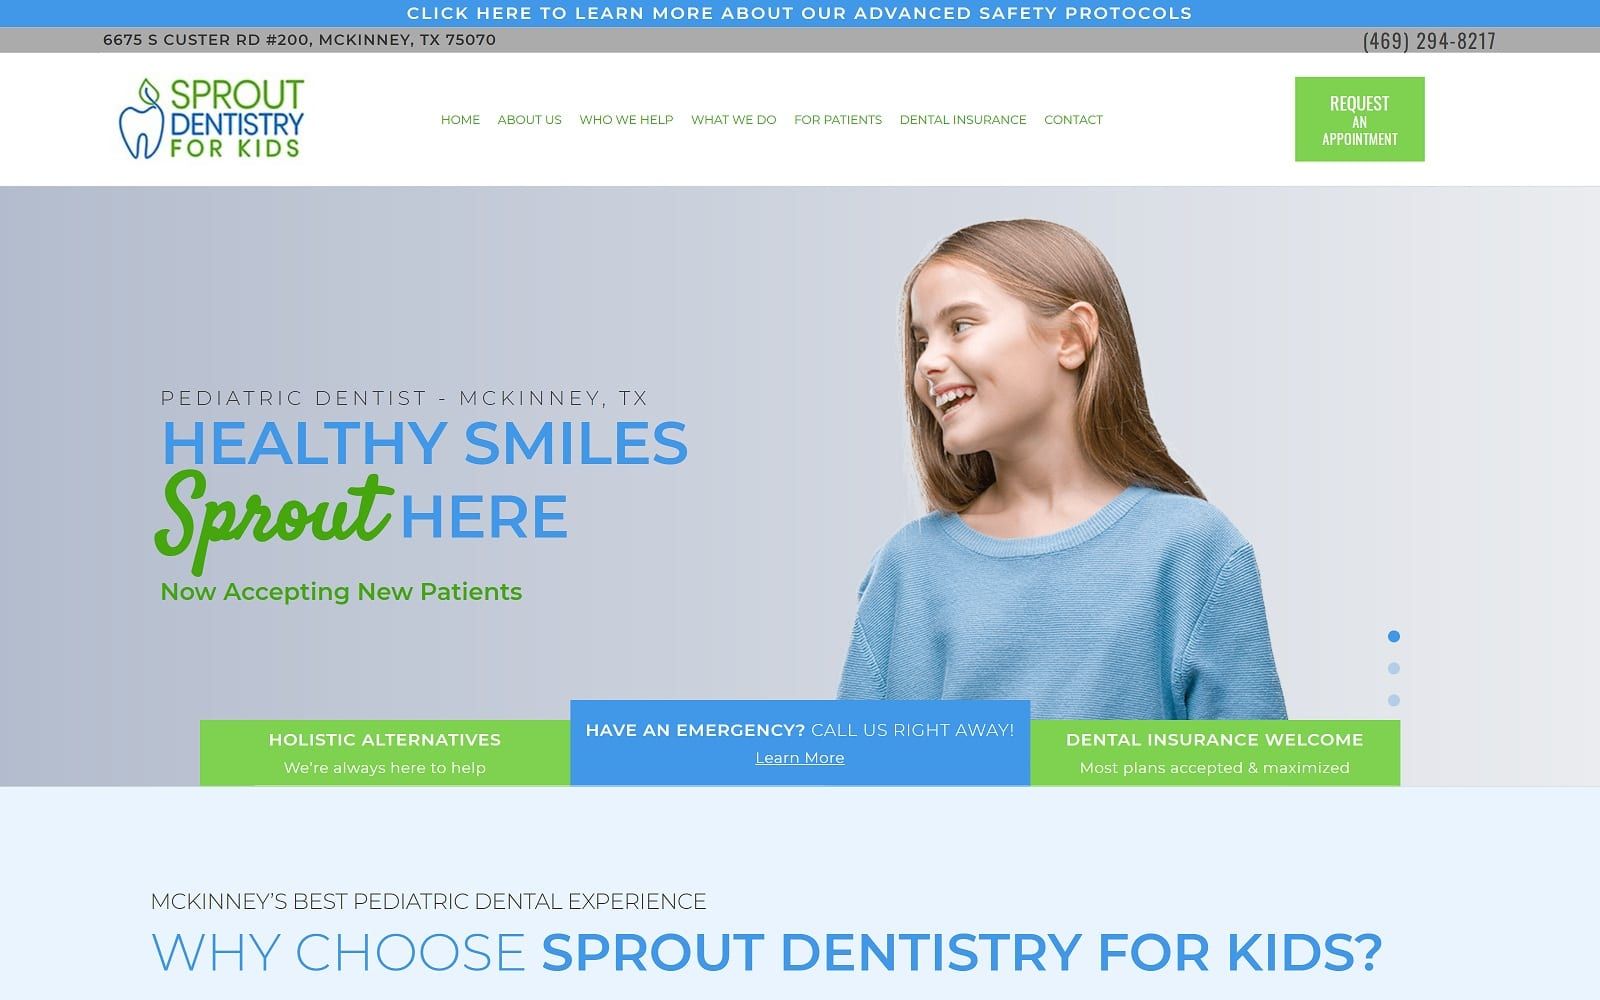 The screenshot of sprout dentistry for kids sproutdentistryforkids. Com website